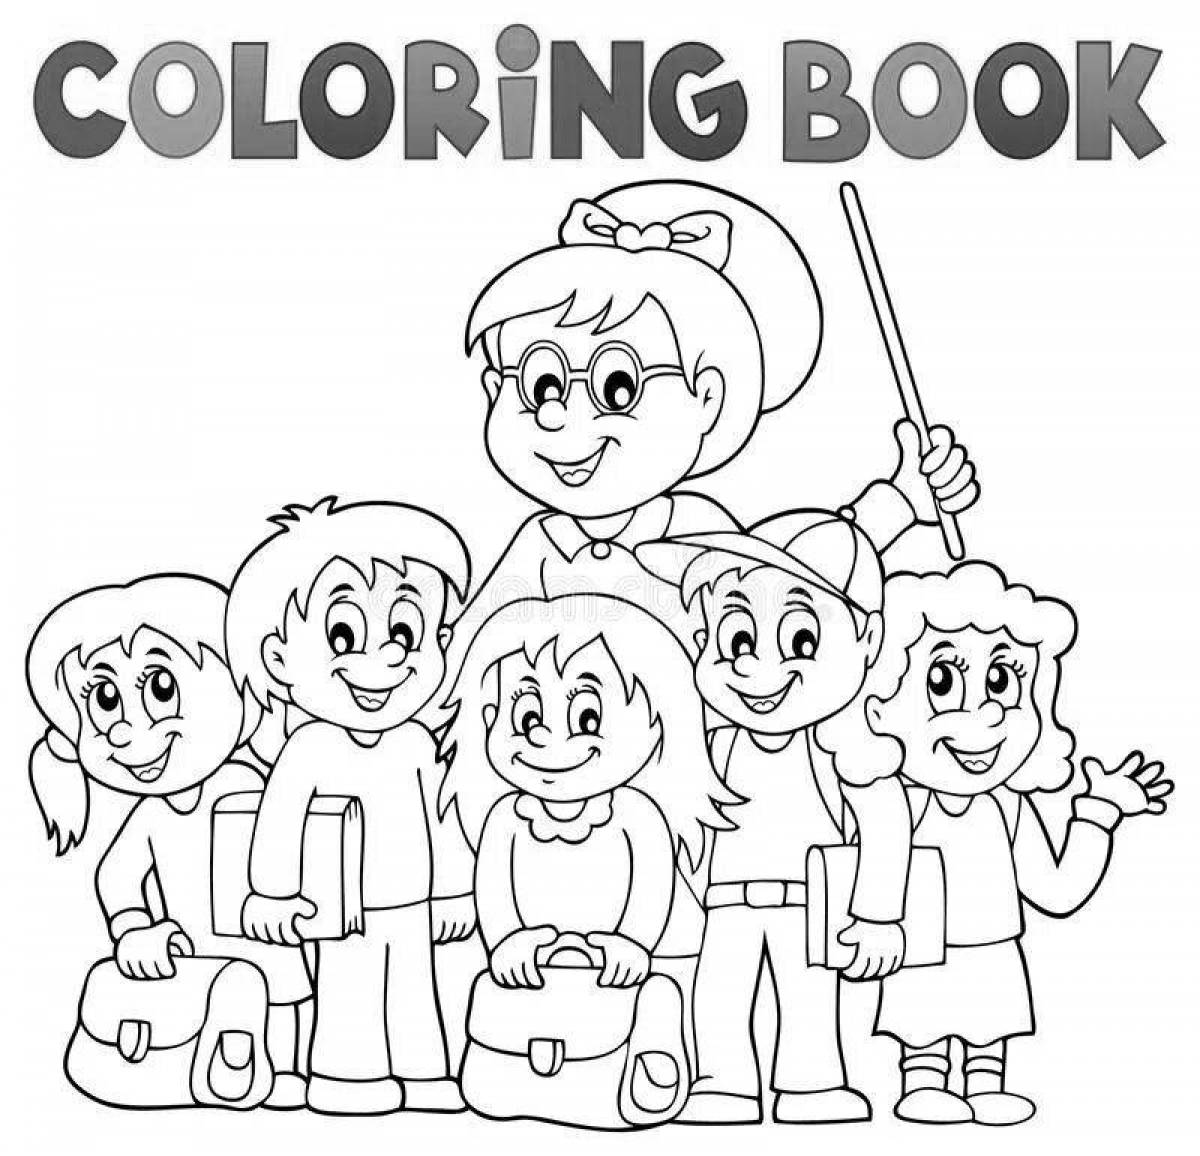 Creative my first coloring book